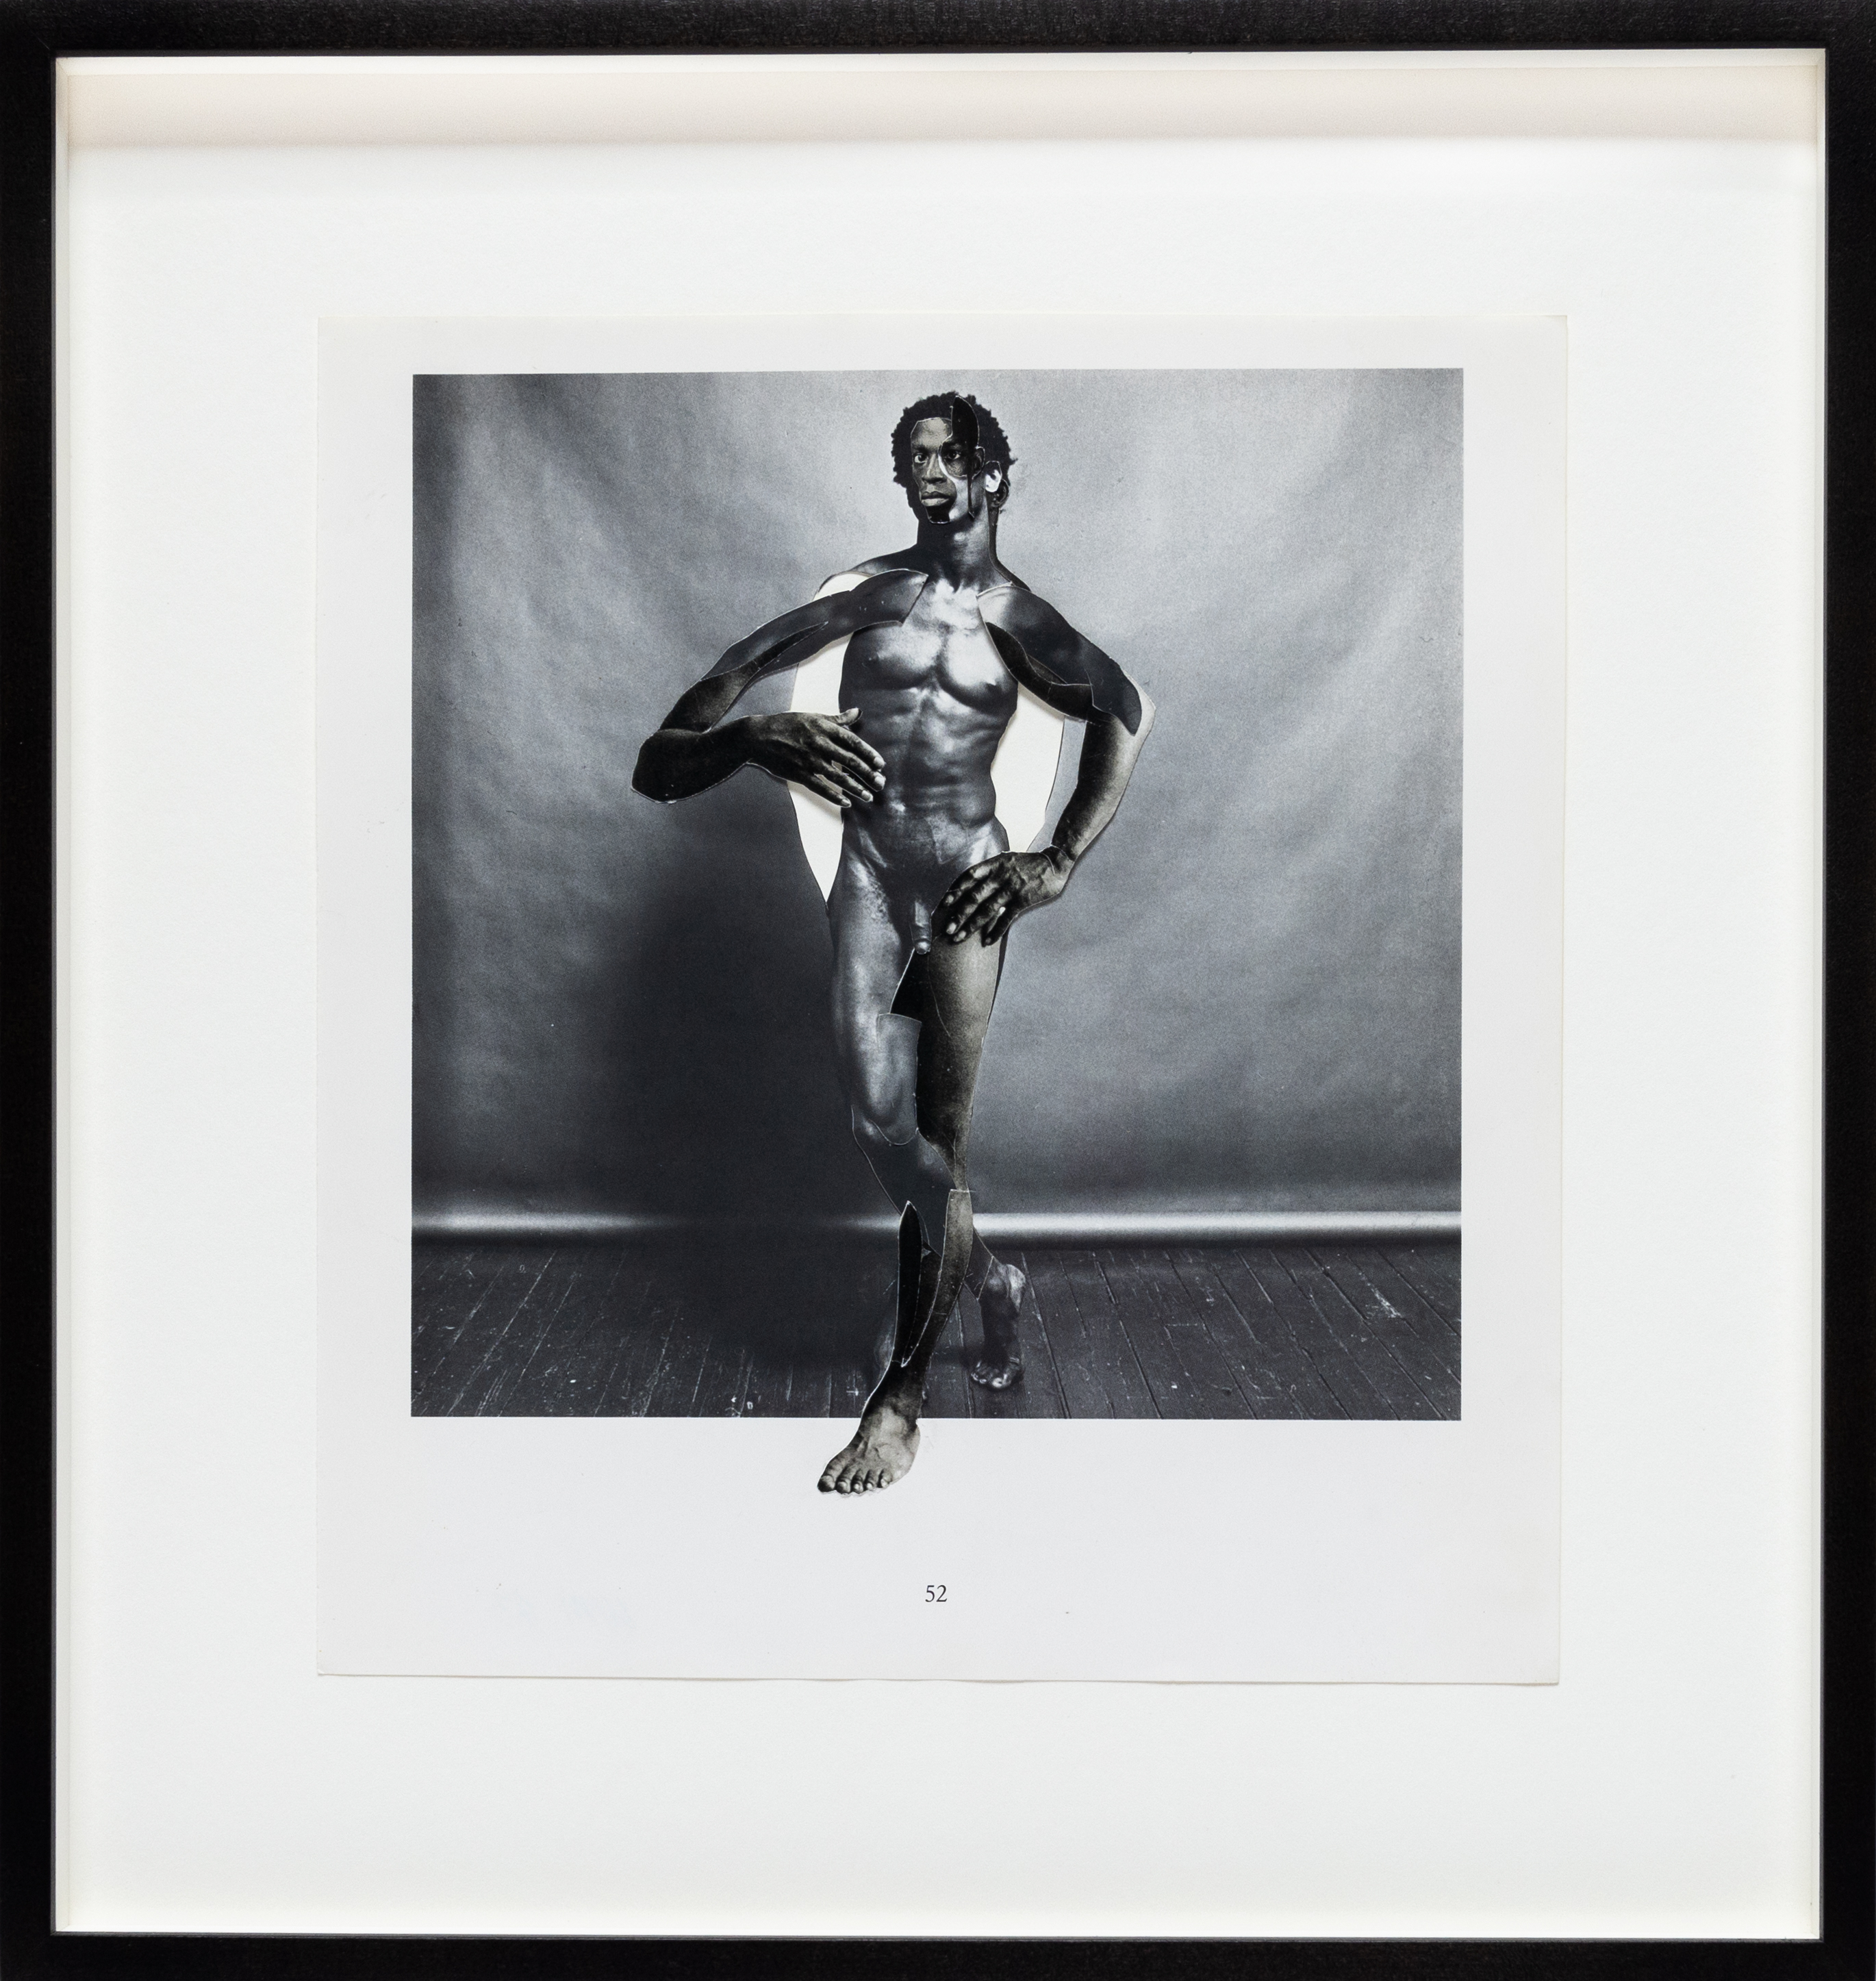 Color image of a black and white collage depicting a nude male figure with abstracted features framed in black